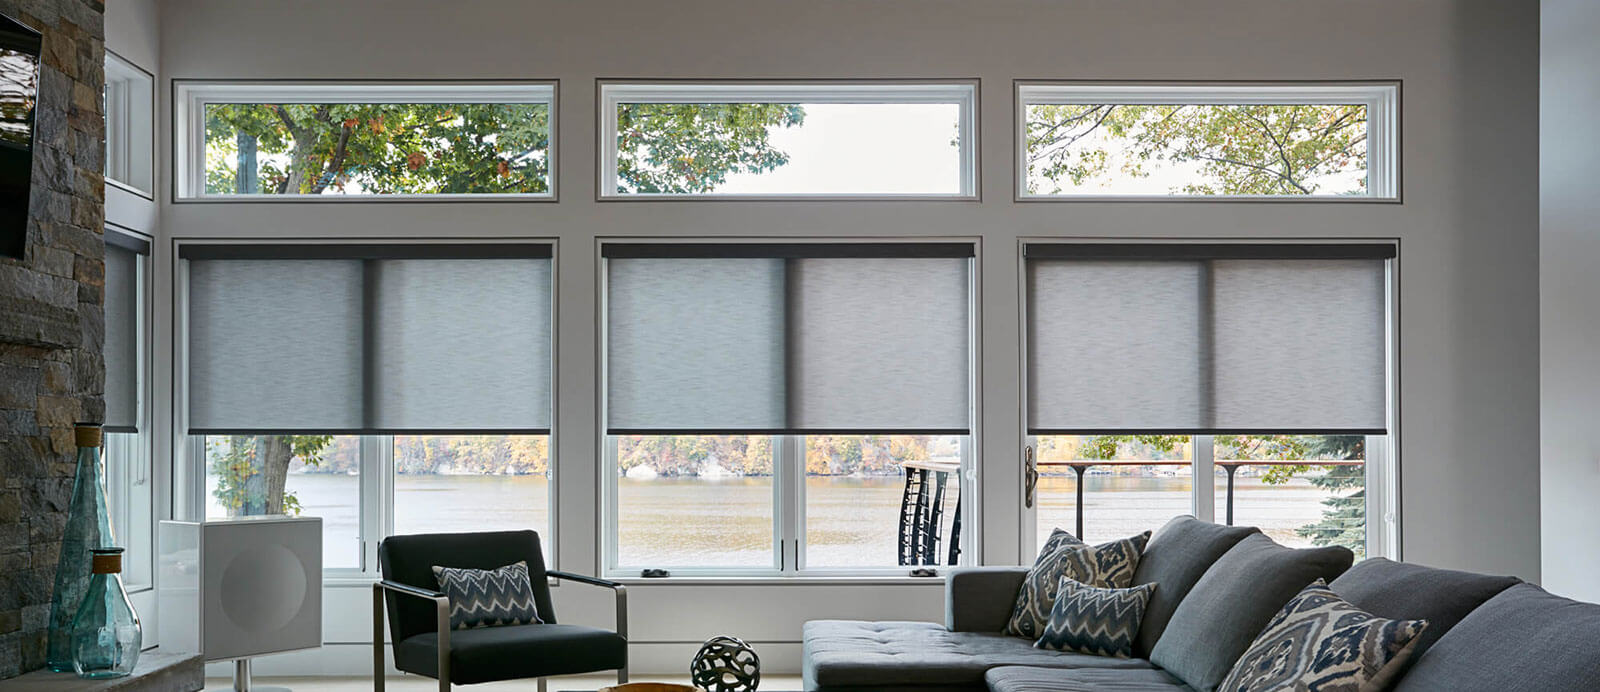 5 Important Things To Consider When Choosing Roller Blinds